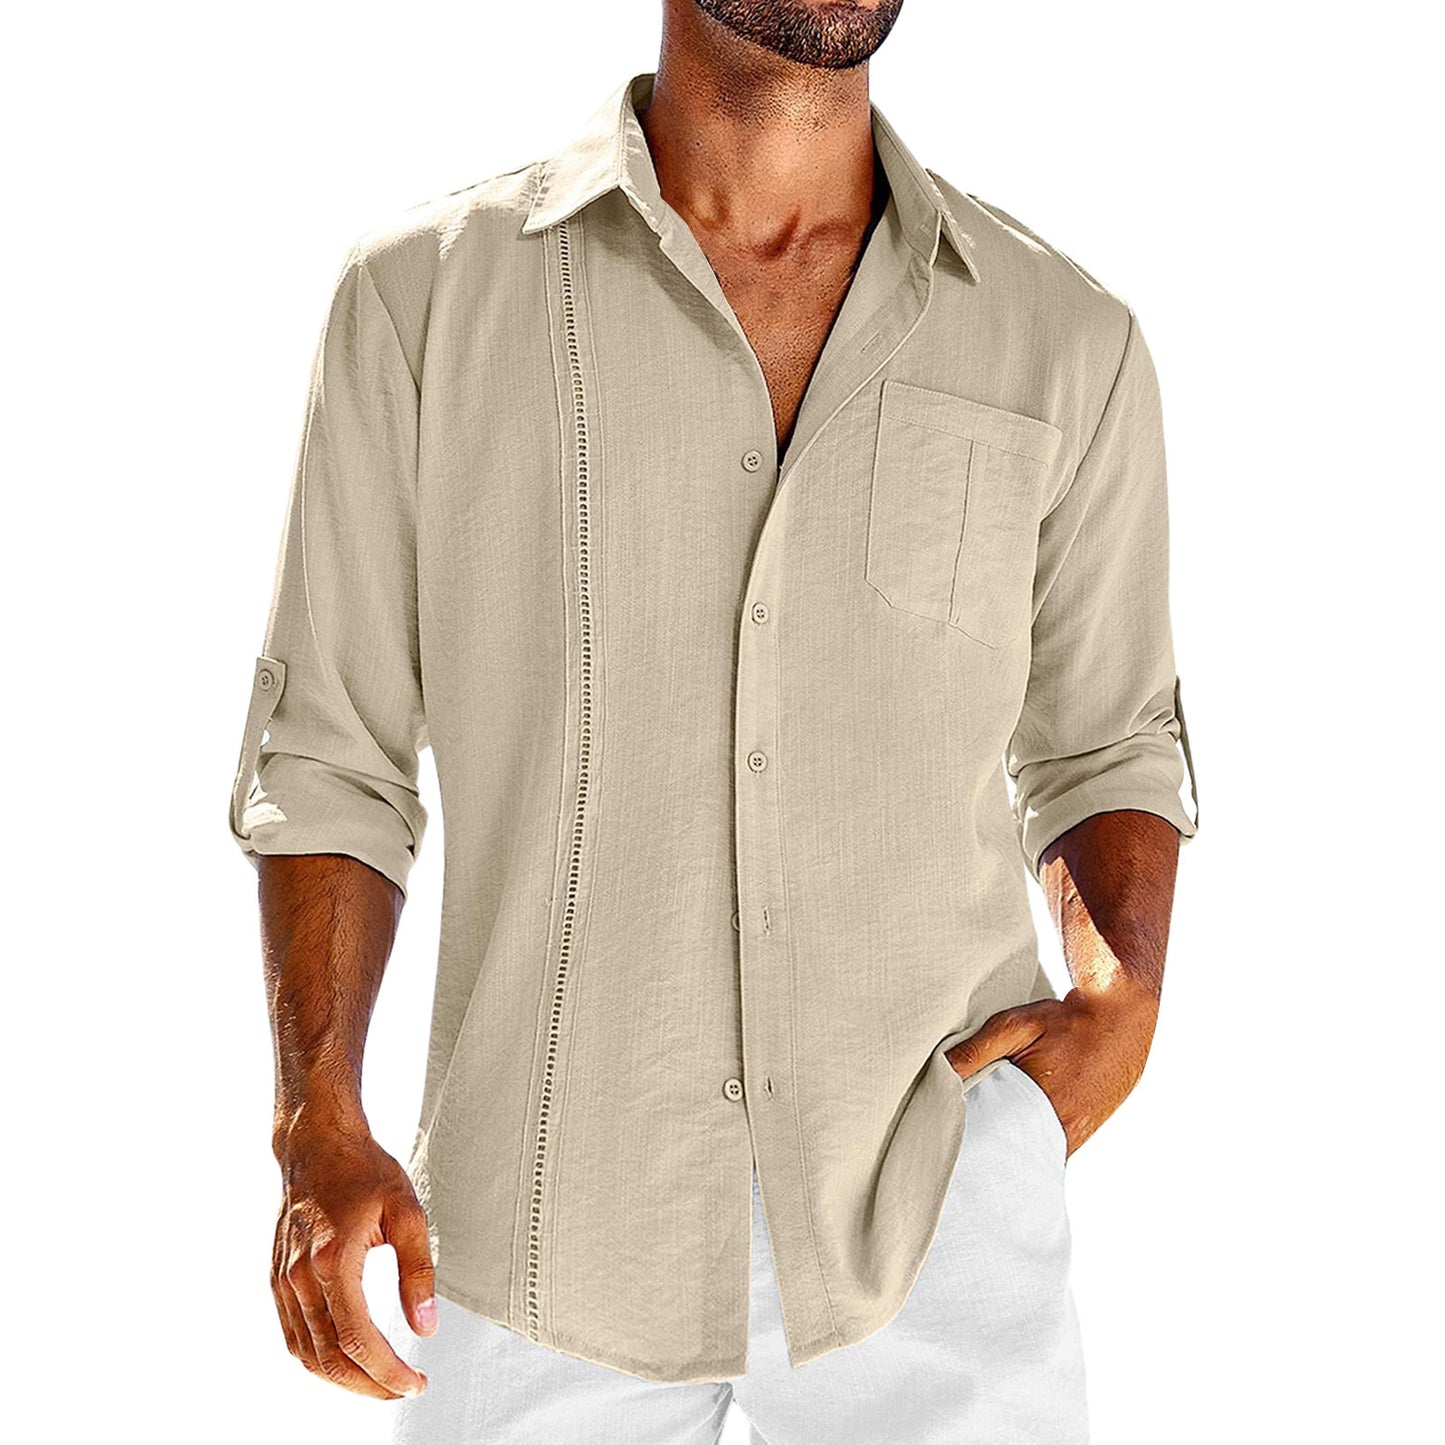 Men’s Casual Long Sleeve Shirt with Pocket - Lace Polo Collar Solid Color Button-Down